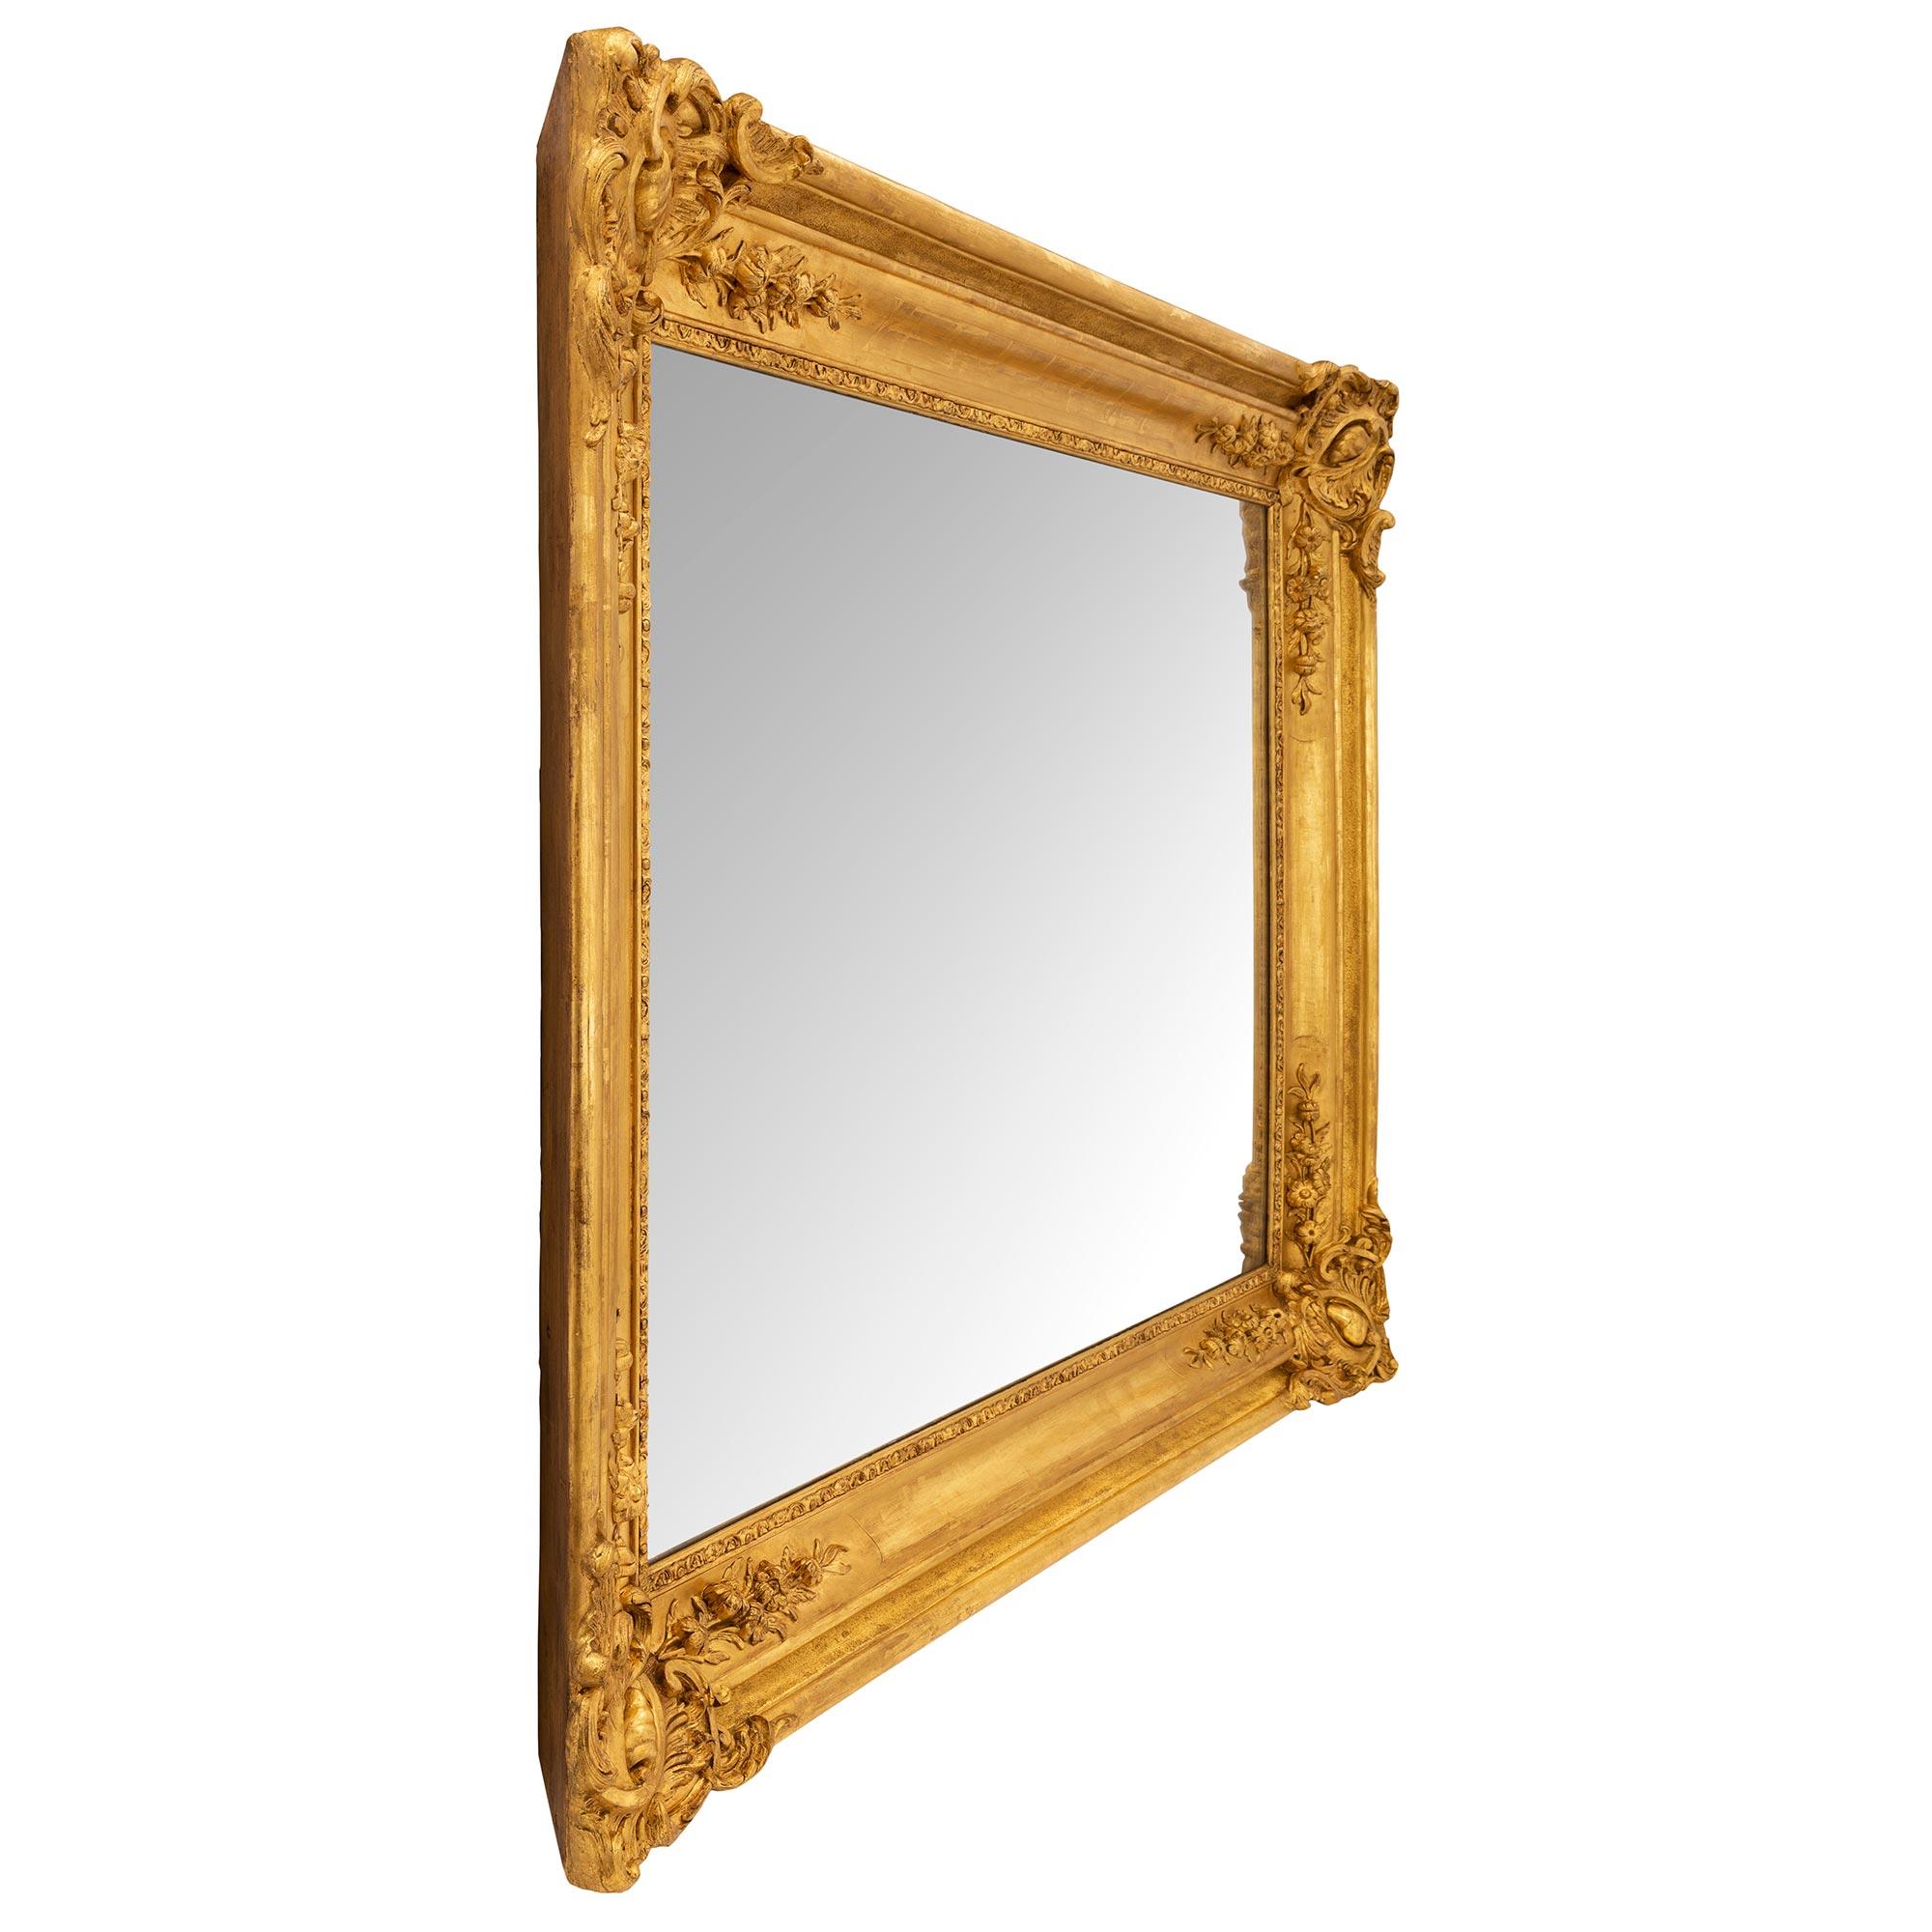 An impressive French 19th century Louis XVI st. giltwood mirror. The original mirror plate is set within a fine wrap around foliate and mottled frame. At each corner are beautiful extremely decorative foliate reserves with charming richly carved